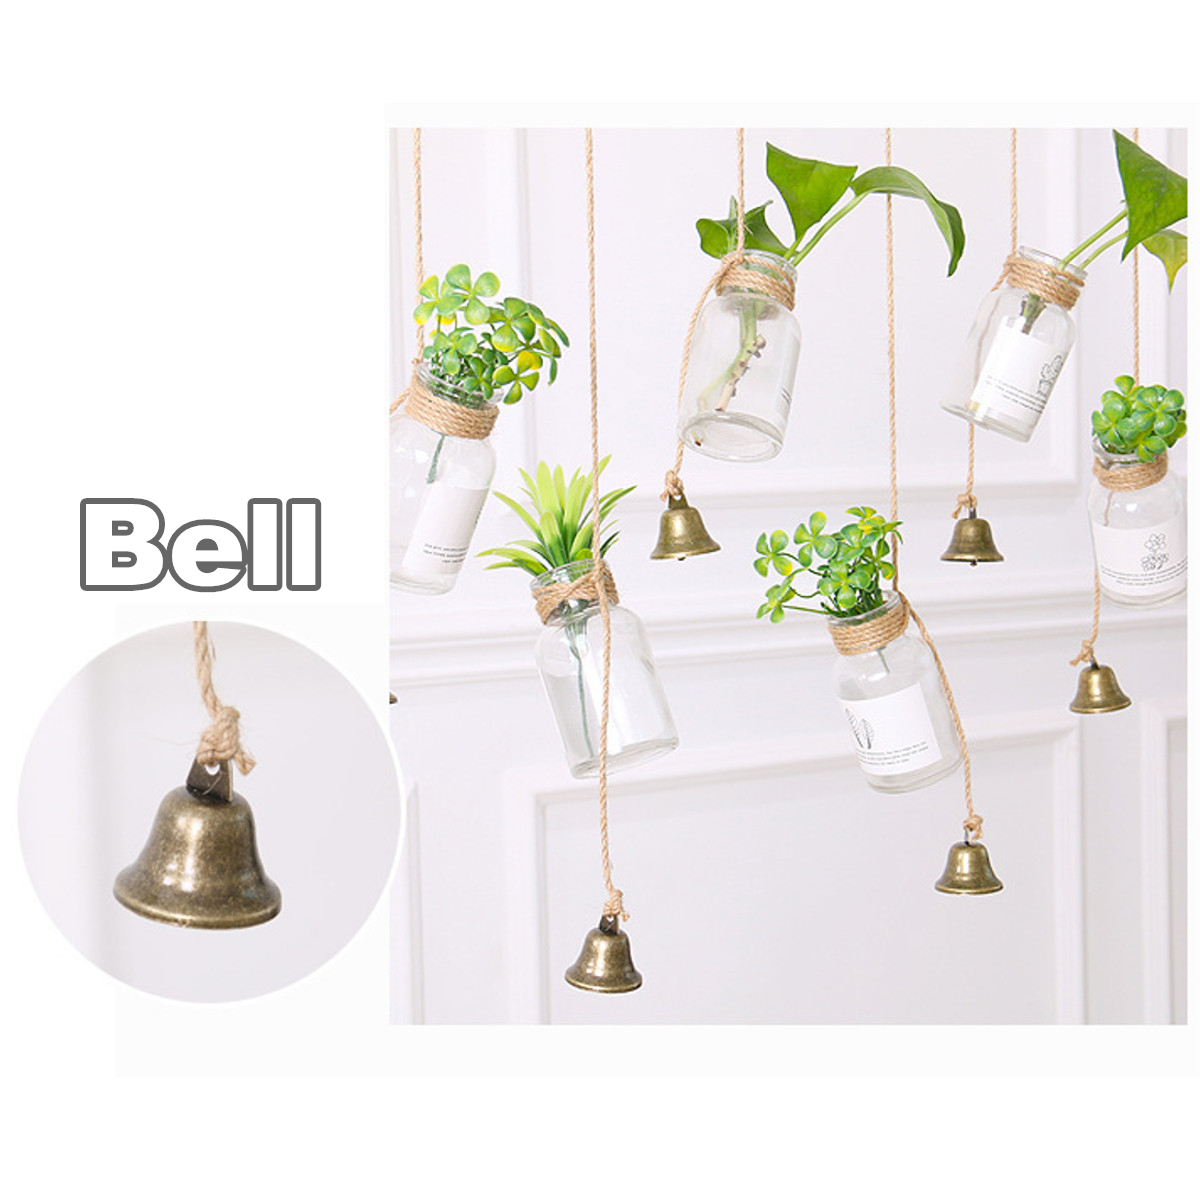 Hanging Clear Glass Flower Plant Hydroponic System Vase Terrarium Container Home Garden